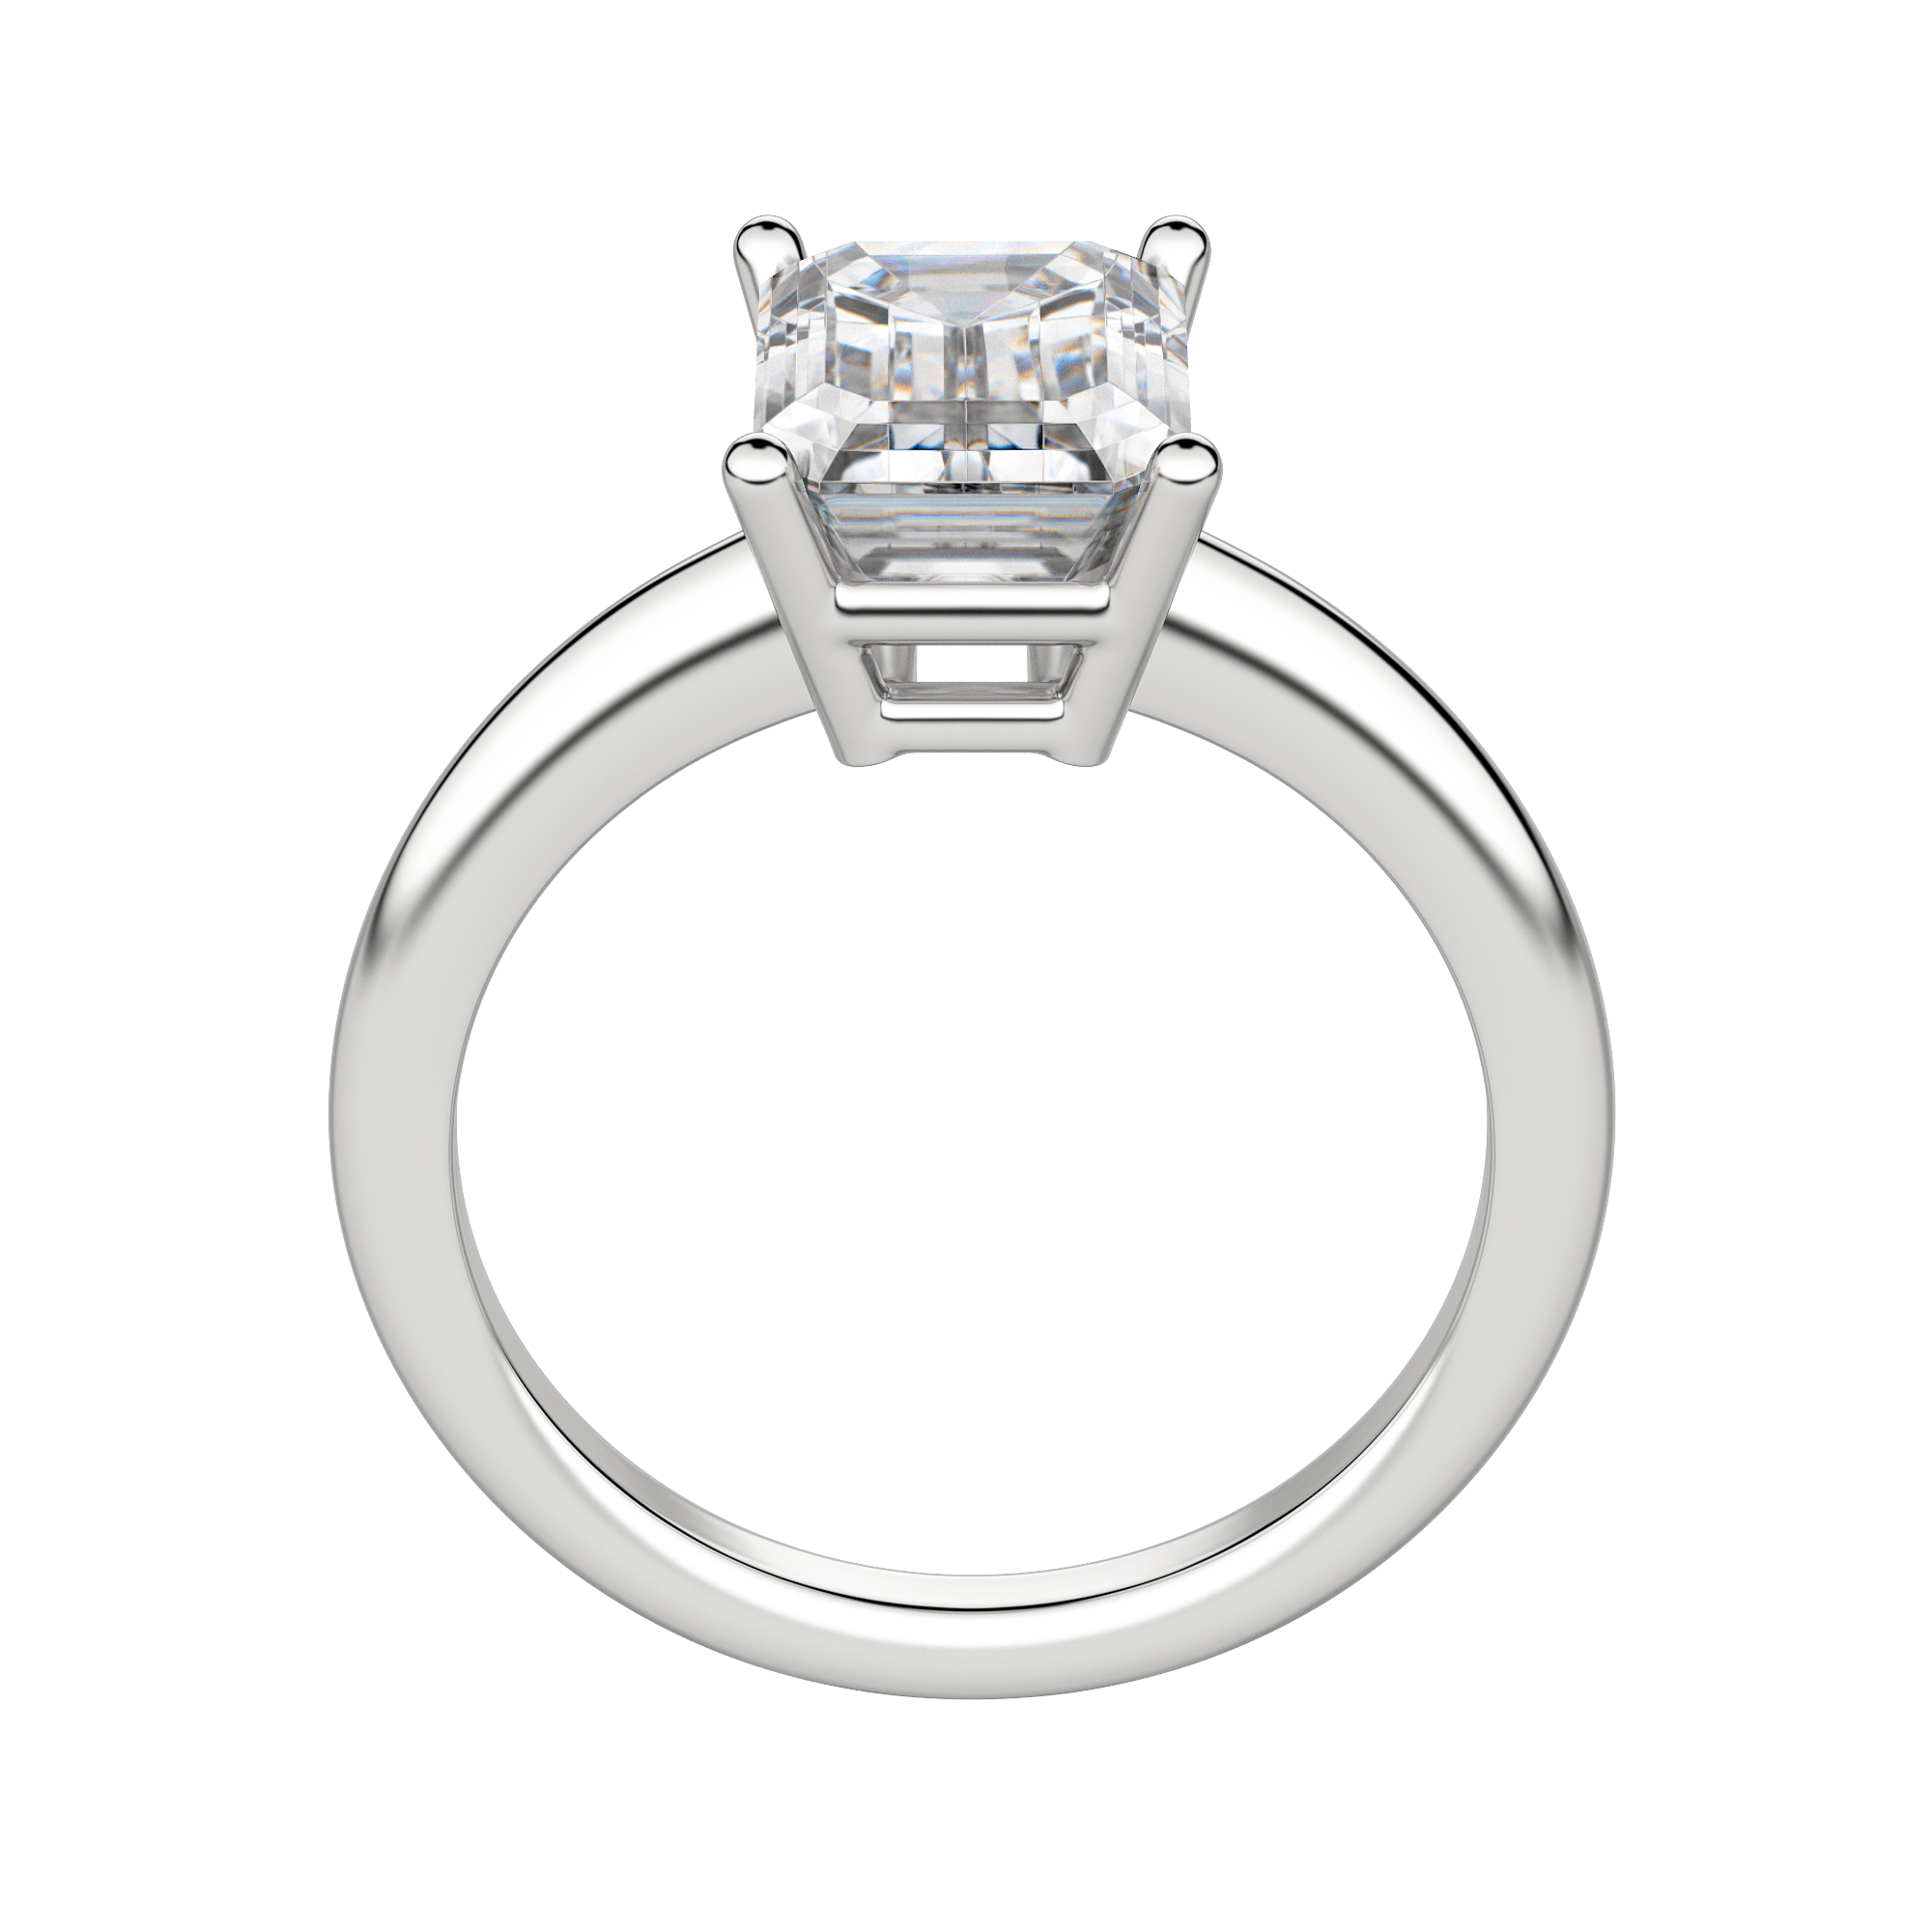 Eave Classic Emerald Cut Engagement Ring, 18K White Gold, Platinum, Hover, 